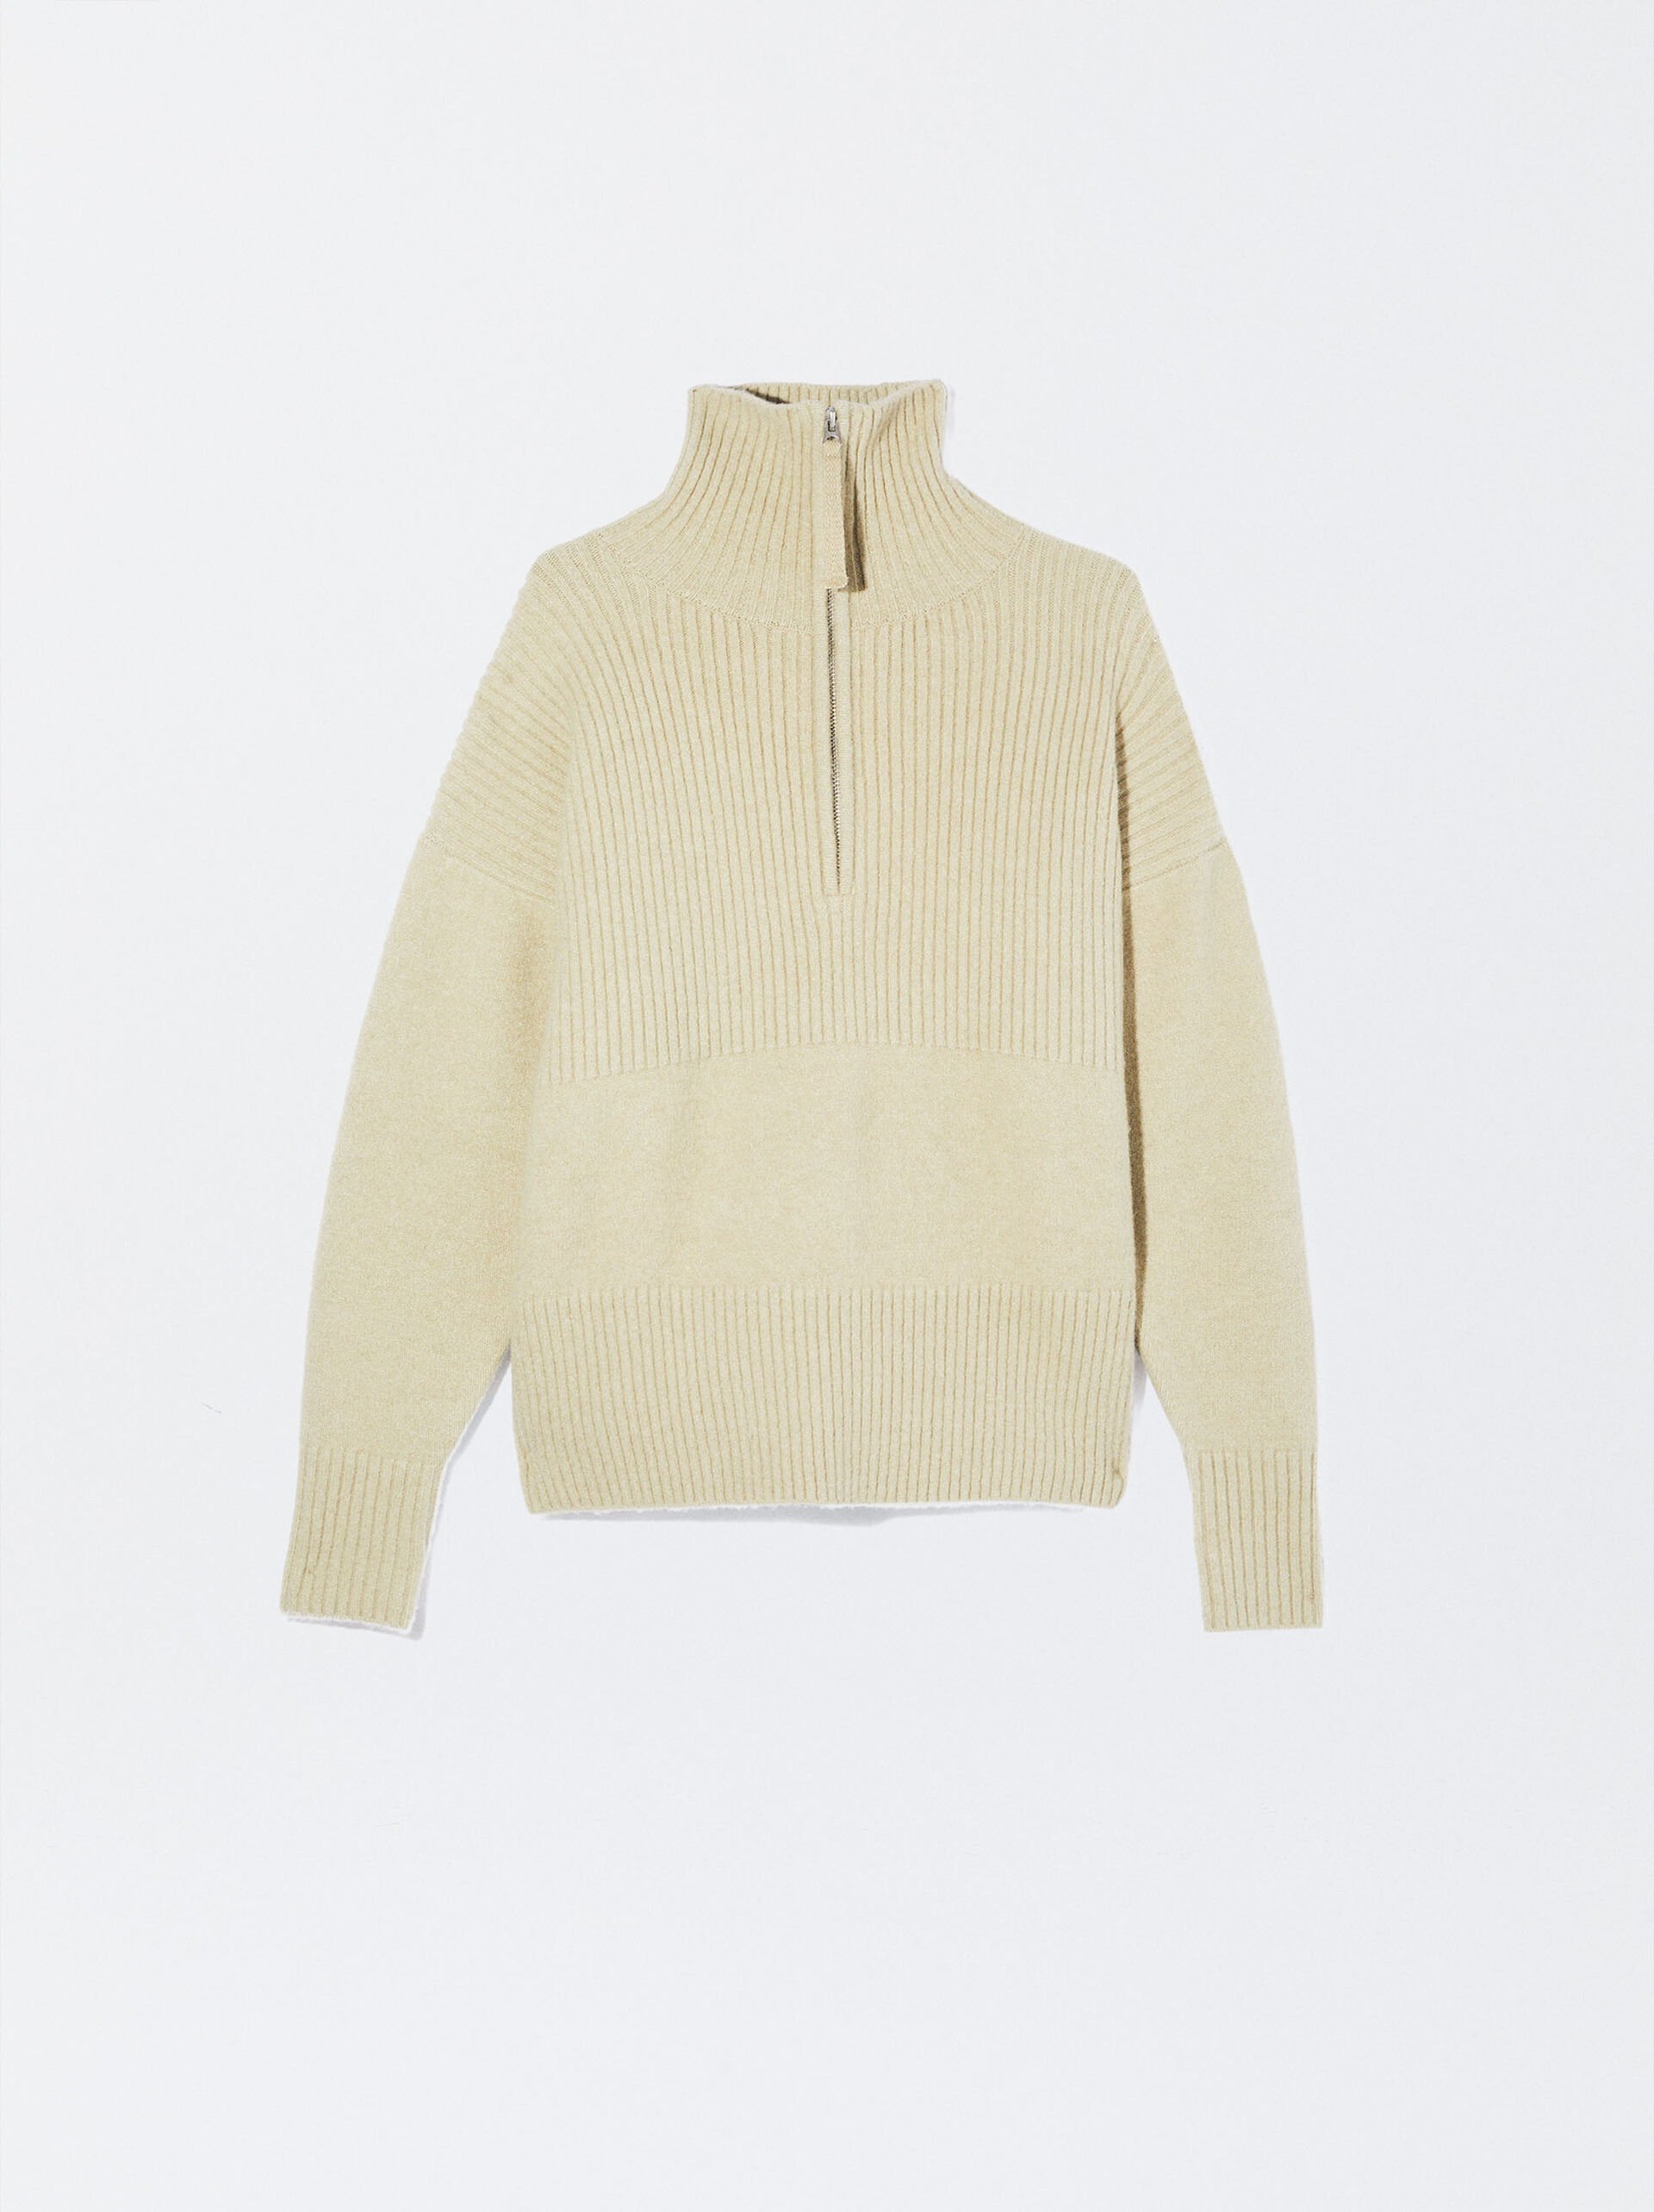 Knit Sweater With High Collar image number 0.0